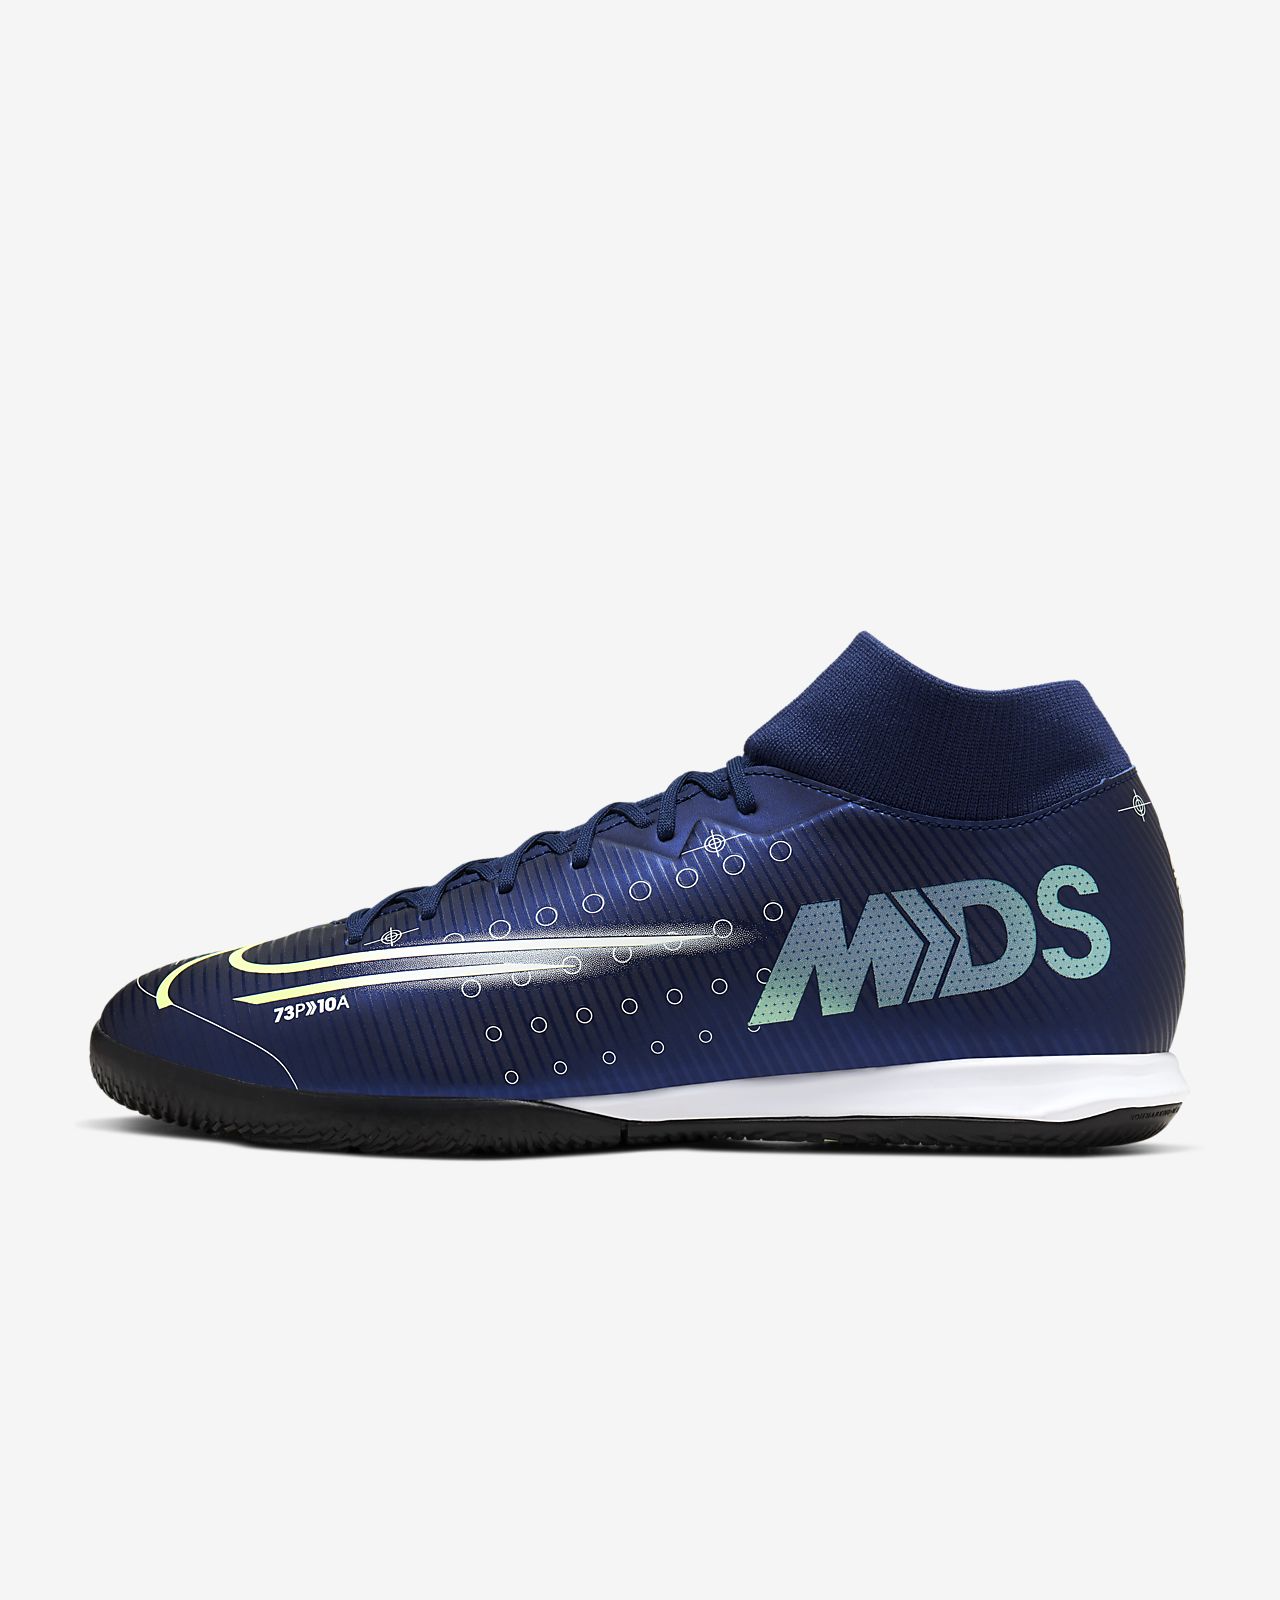 Nike Mercurial Superfly 7 Academy Mds Ic Indoor Court Soccer Shoe